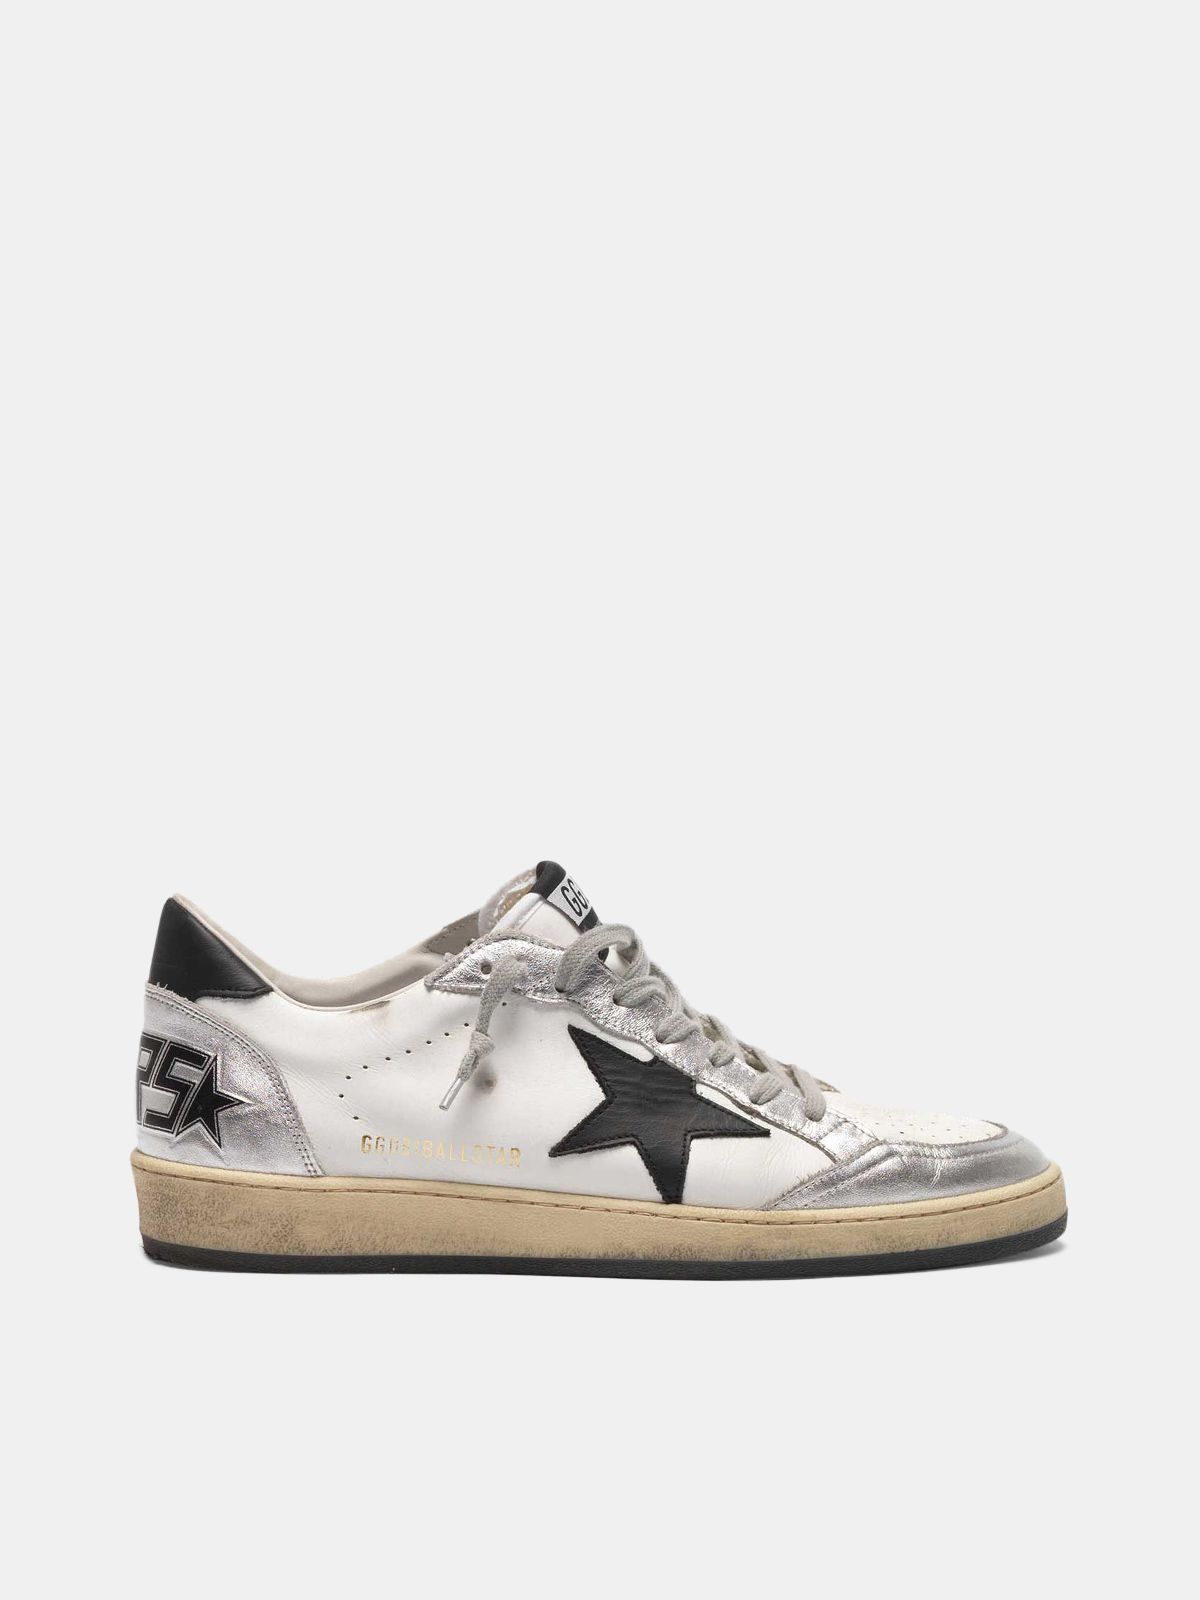 Leather Ball Star sneakers with 